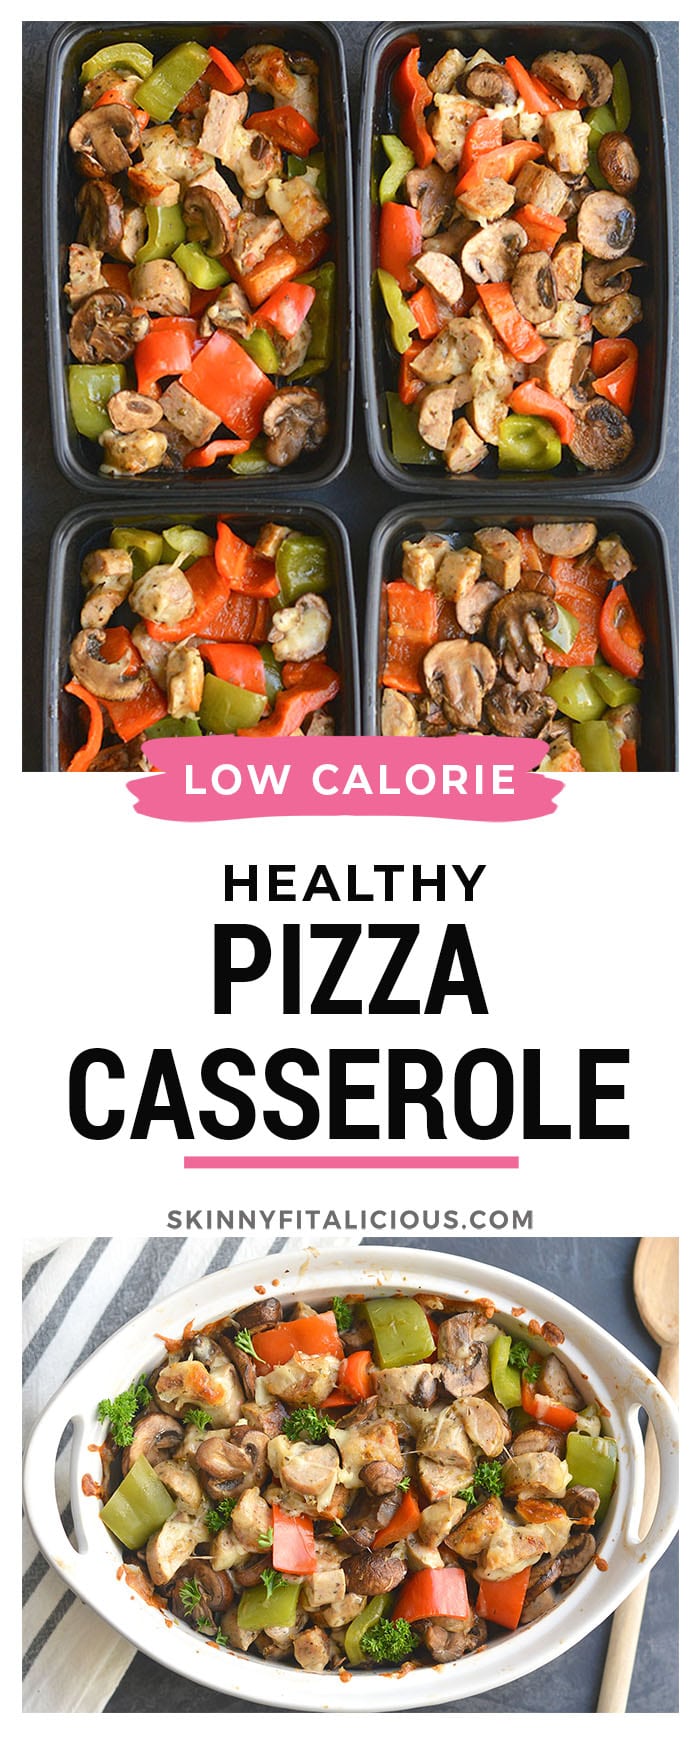 Meal Prep Sausage Pepper Pizza Casserole! Quick veggie-protein loaded casserole with a touch of cheesy goodness on top. A filling and flavorful low carb meal for lunch or dinner!